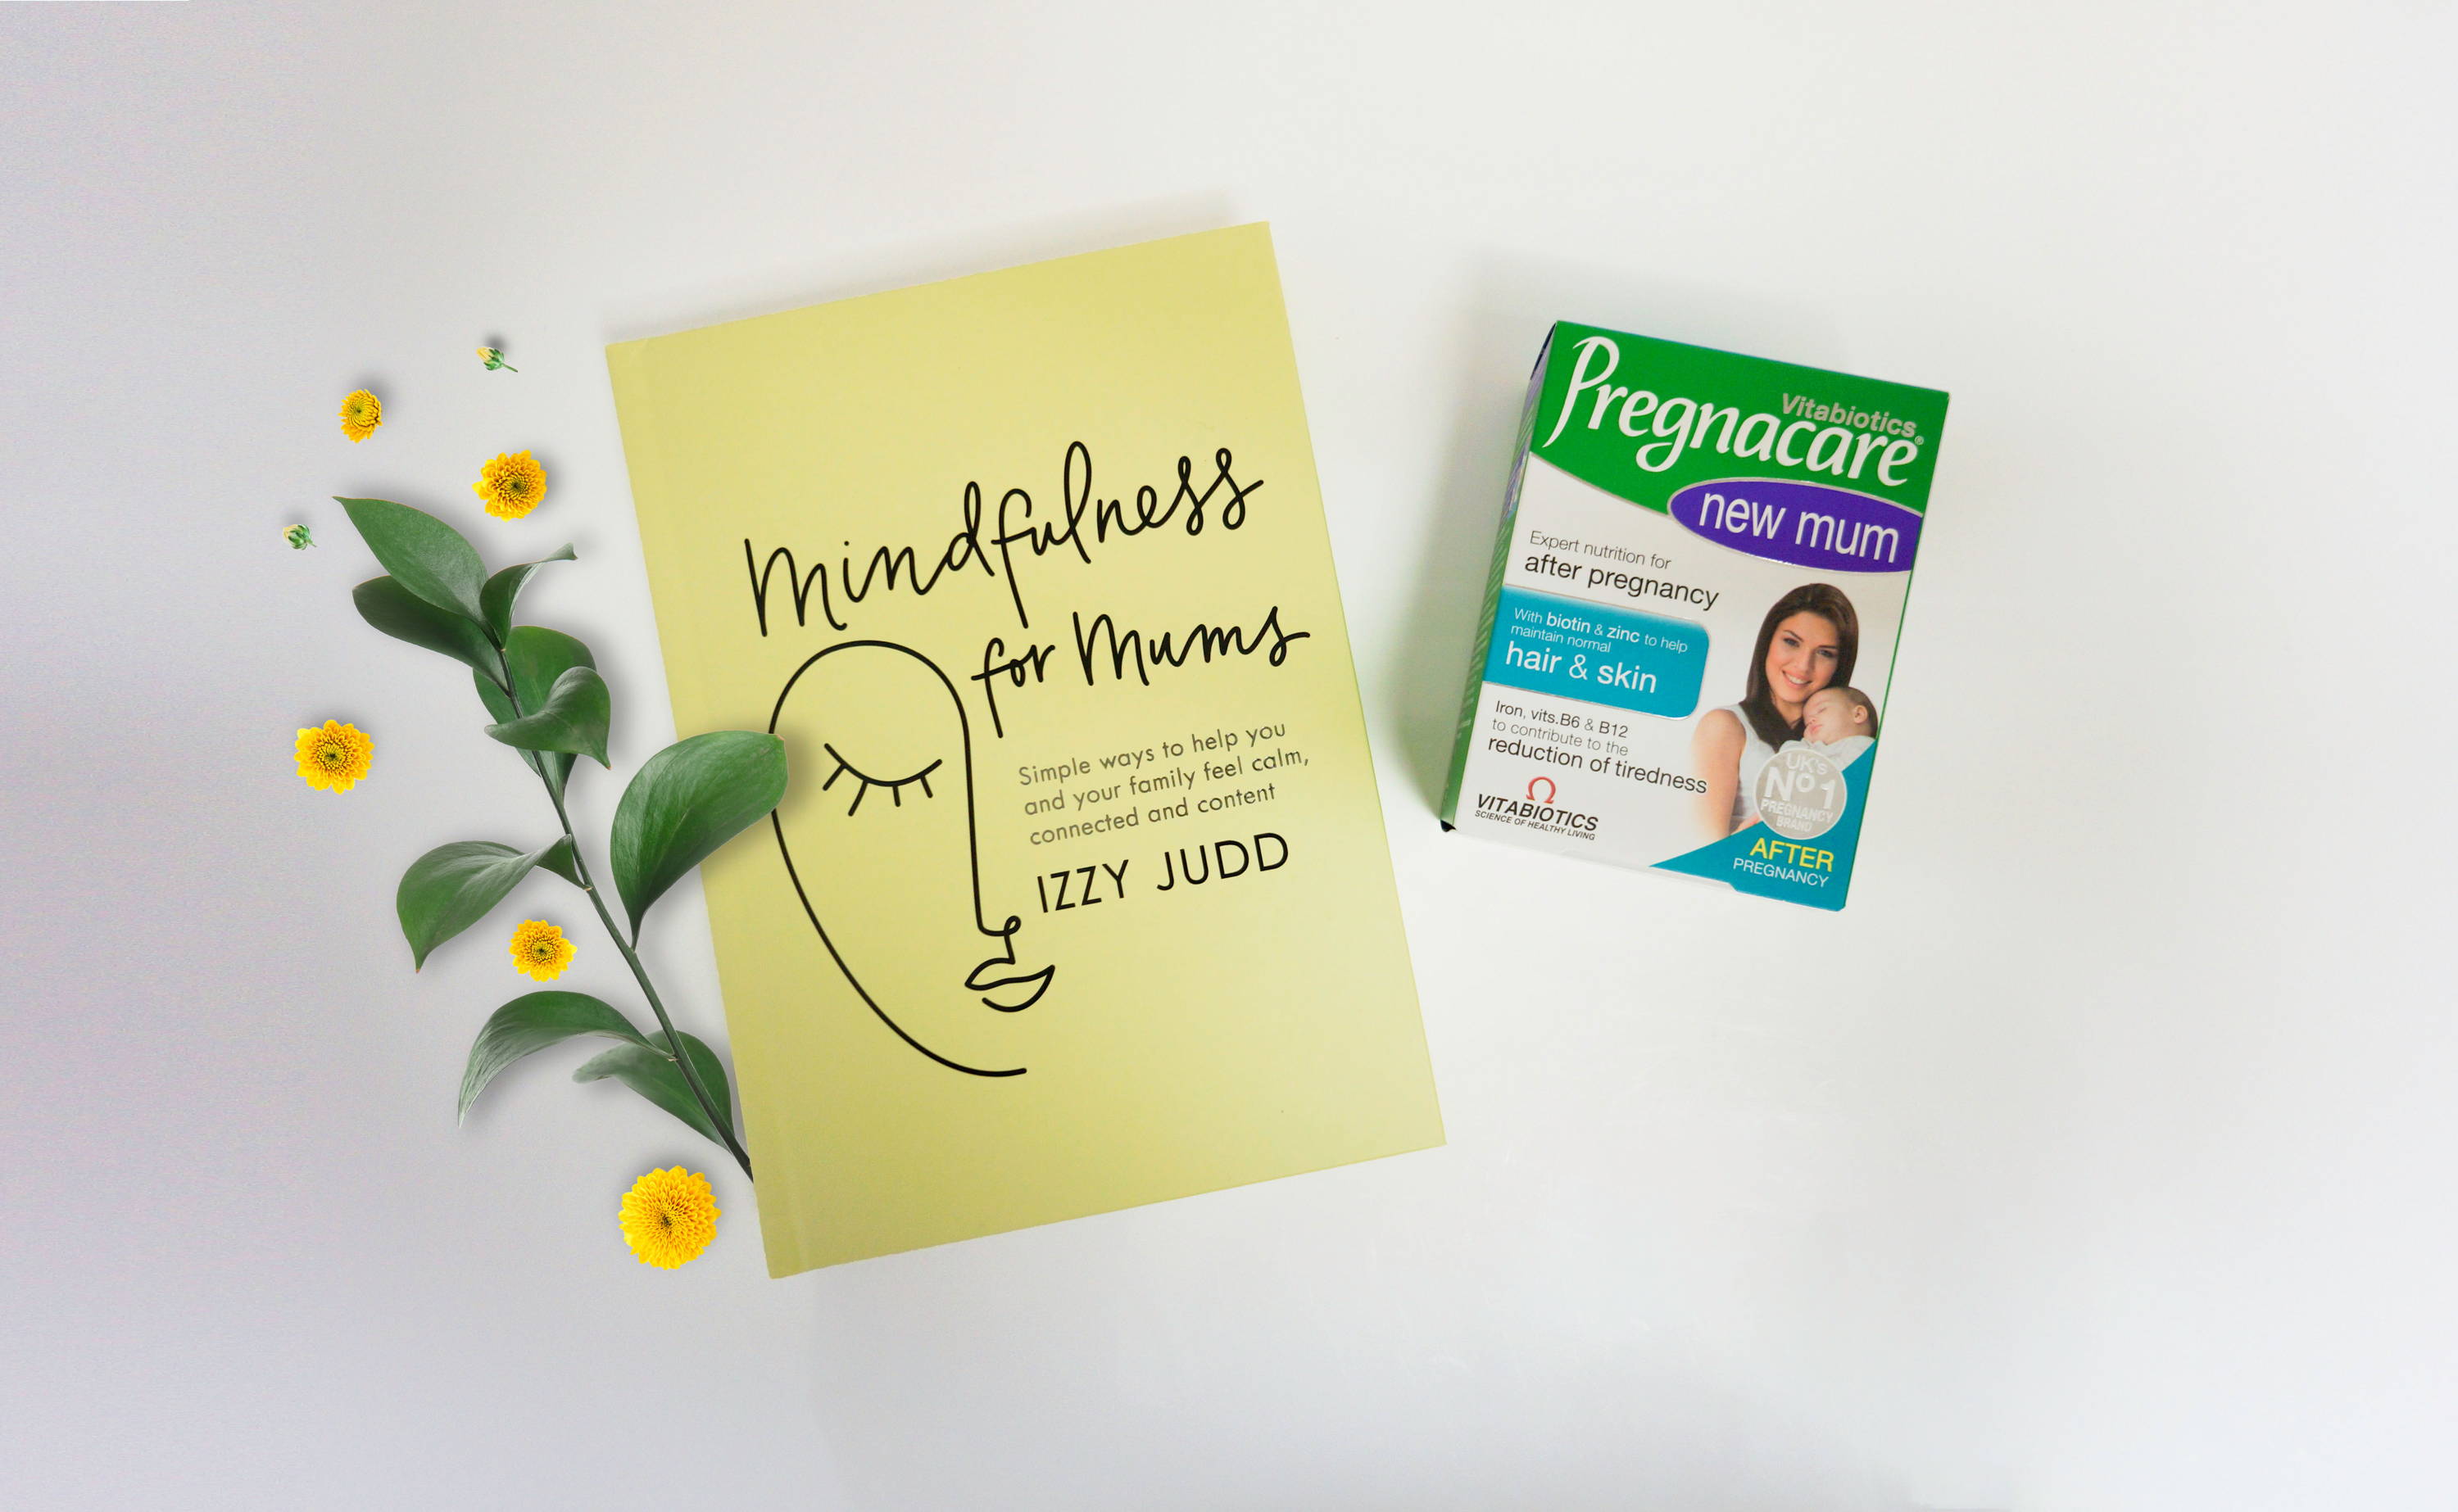 Izzy Judd Book With Pregnacare Box On Display